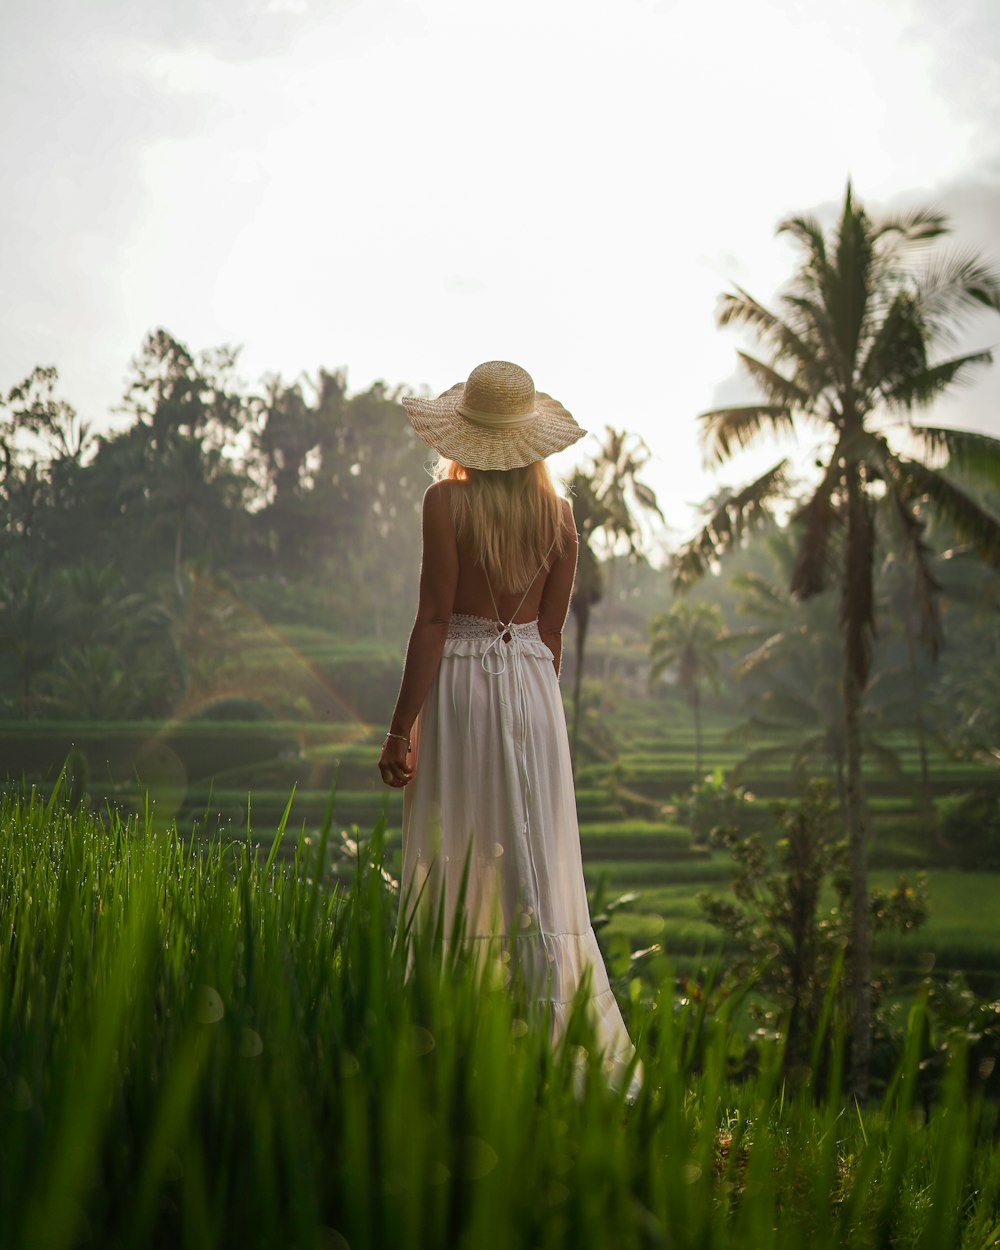 a woman in a white dress and straw hat walking through a field